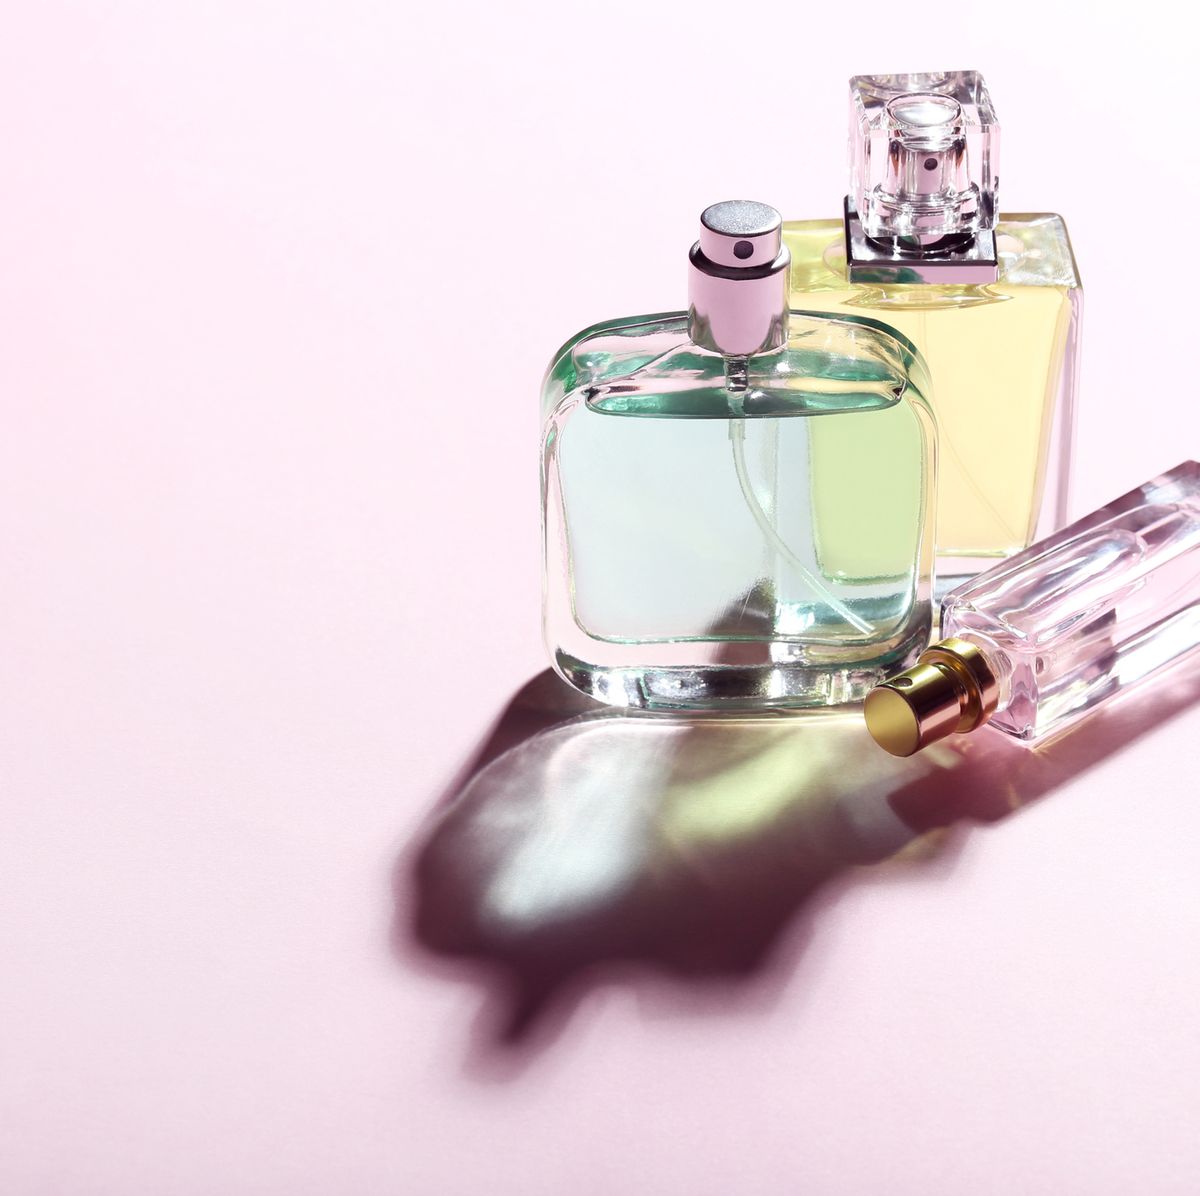 Best perfume for women, chosen by GH beauty experts and editors